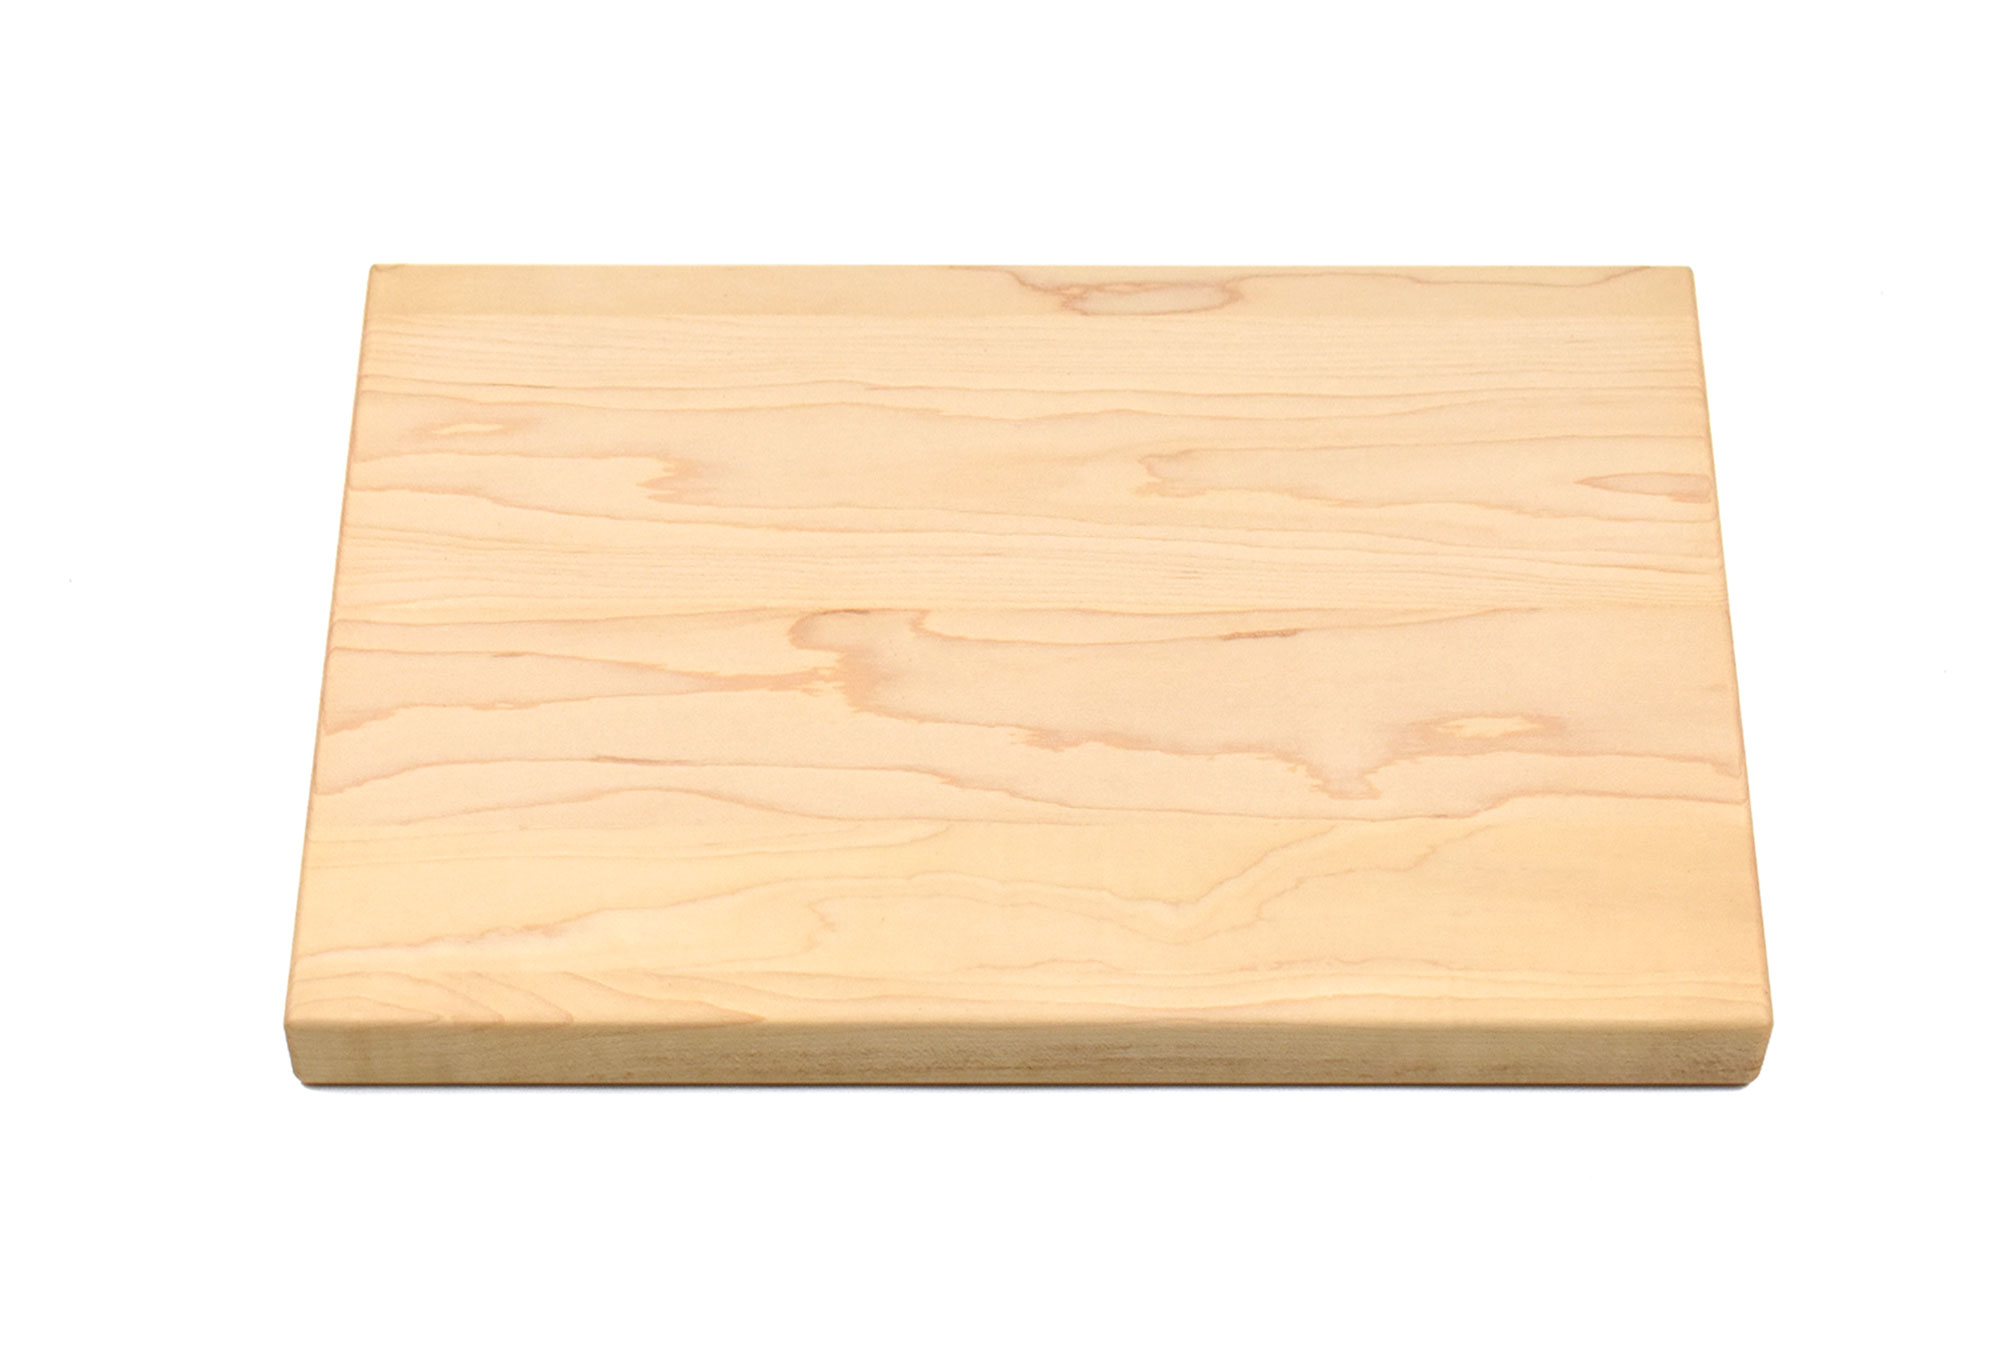 Choosing the Right Cutting Board Size